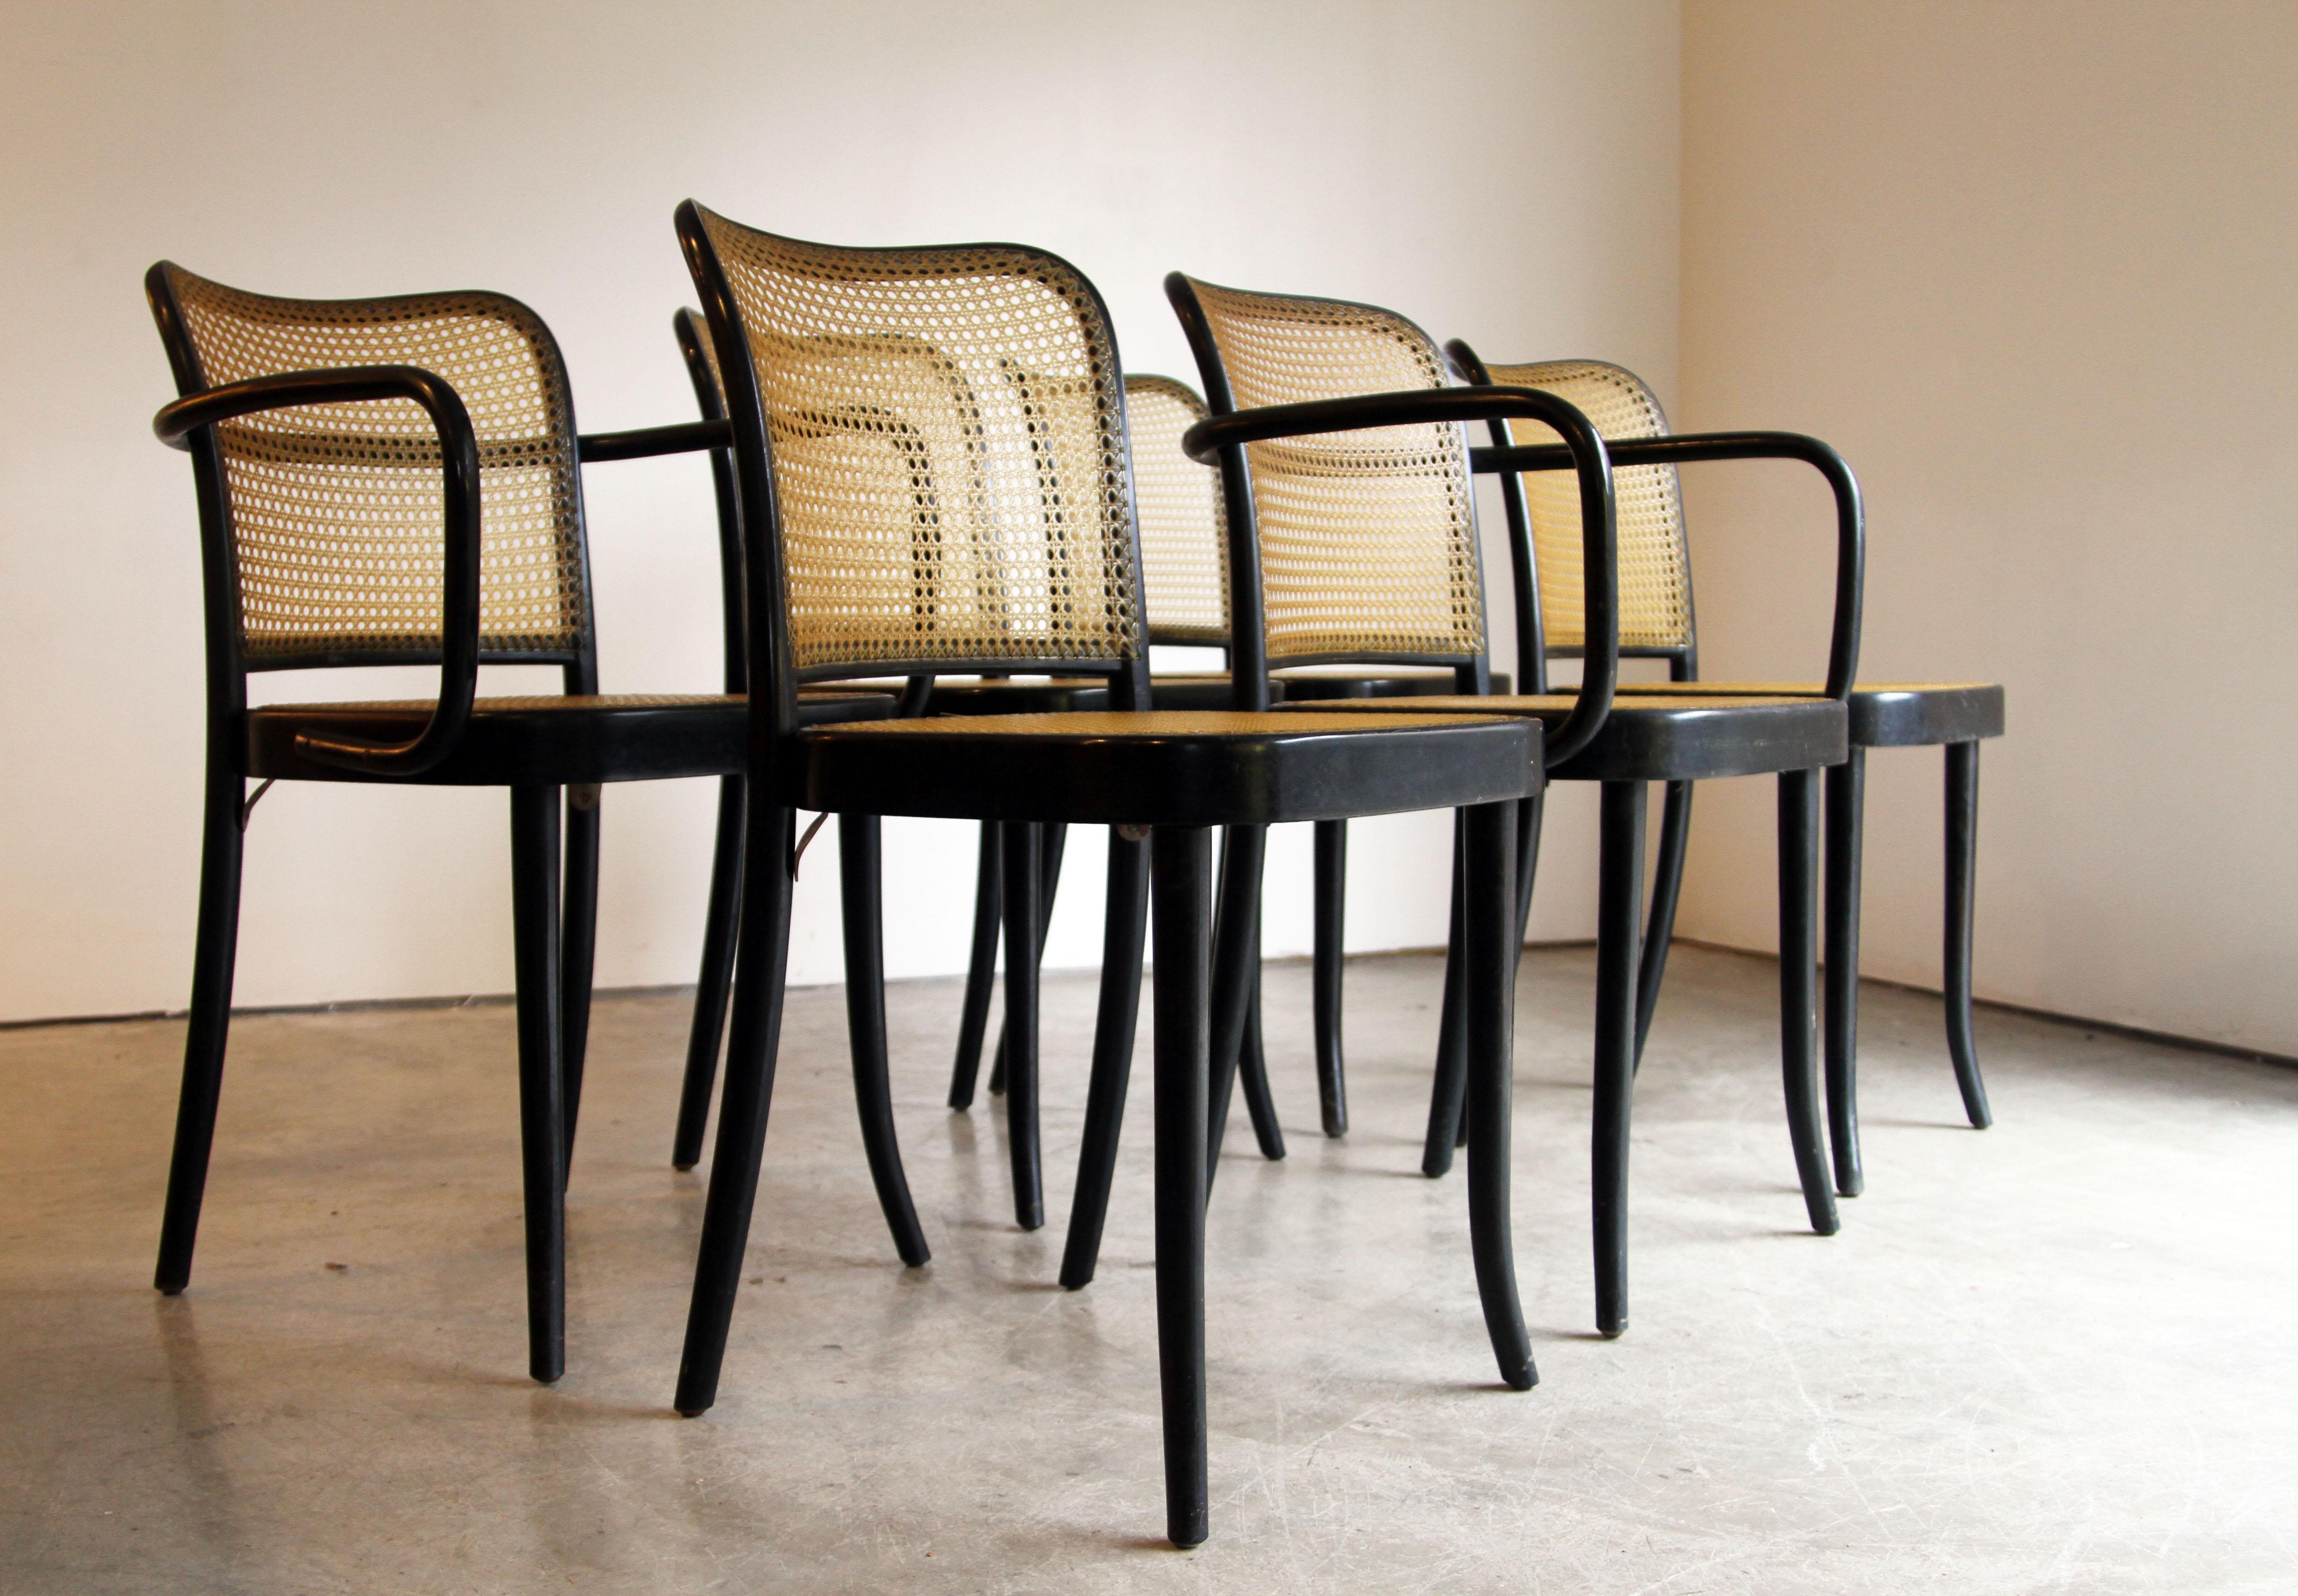 Designer: Josef Hoffman
Manufacture: Stendig
Period/style: Mid-Century Modern
Country: Chech Republic
Date: 1950s

2 armchairs and 4 side chairs.